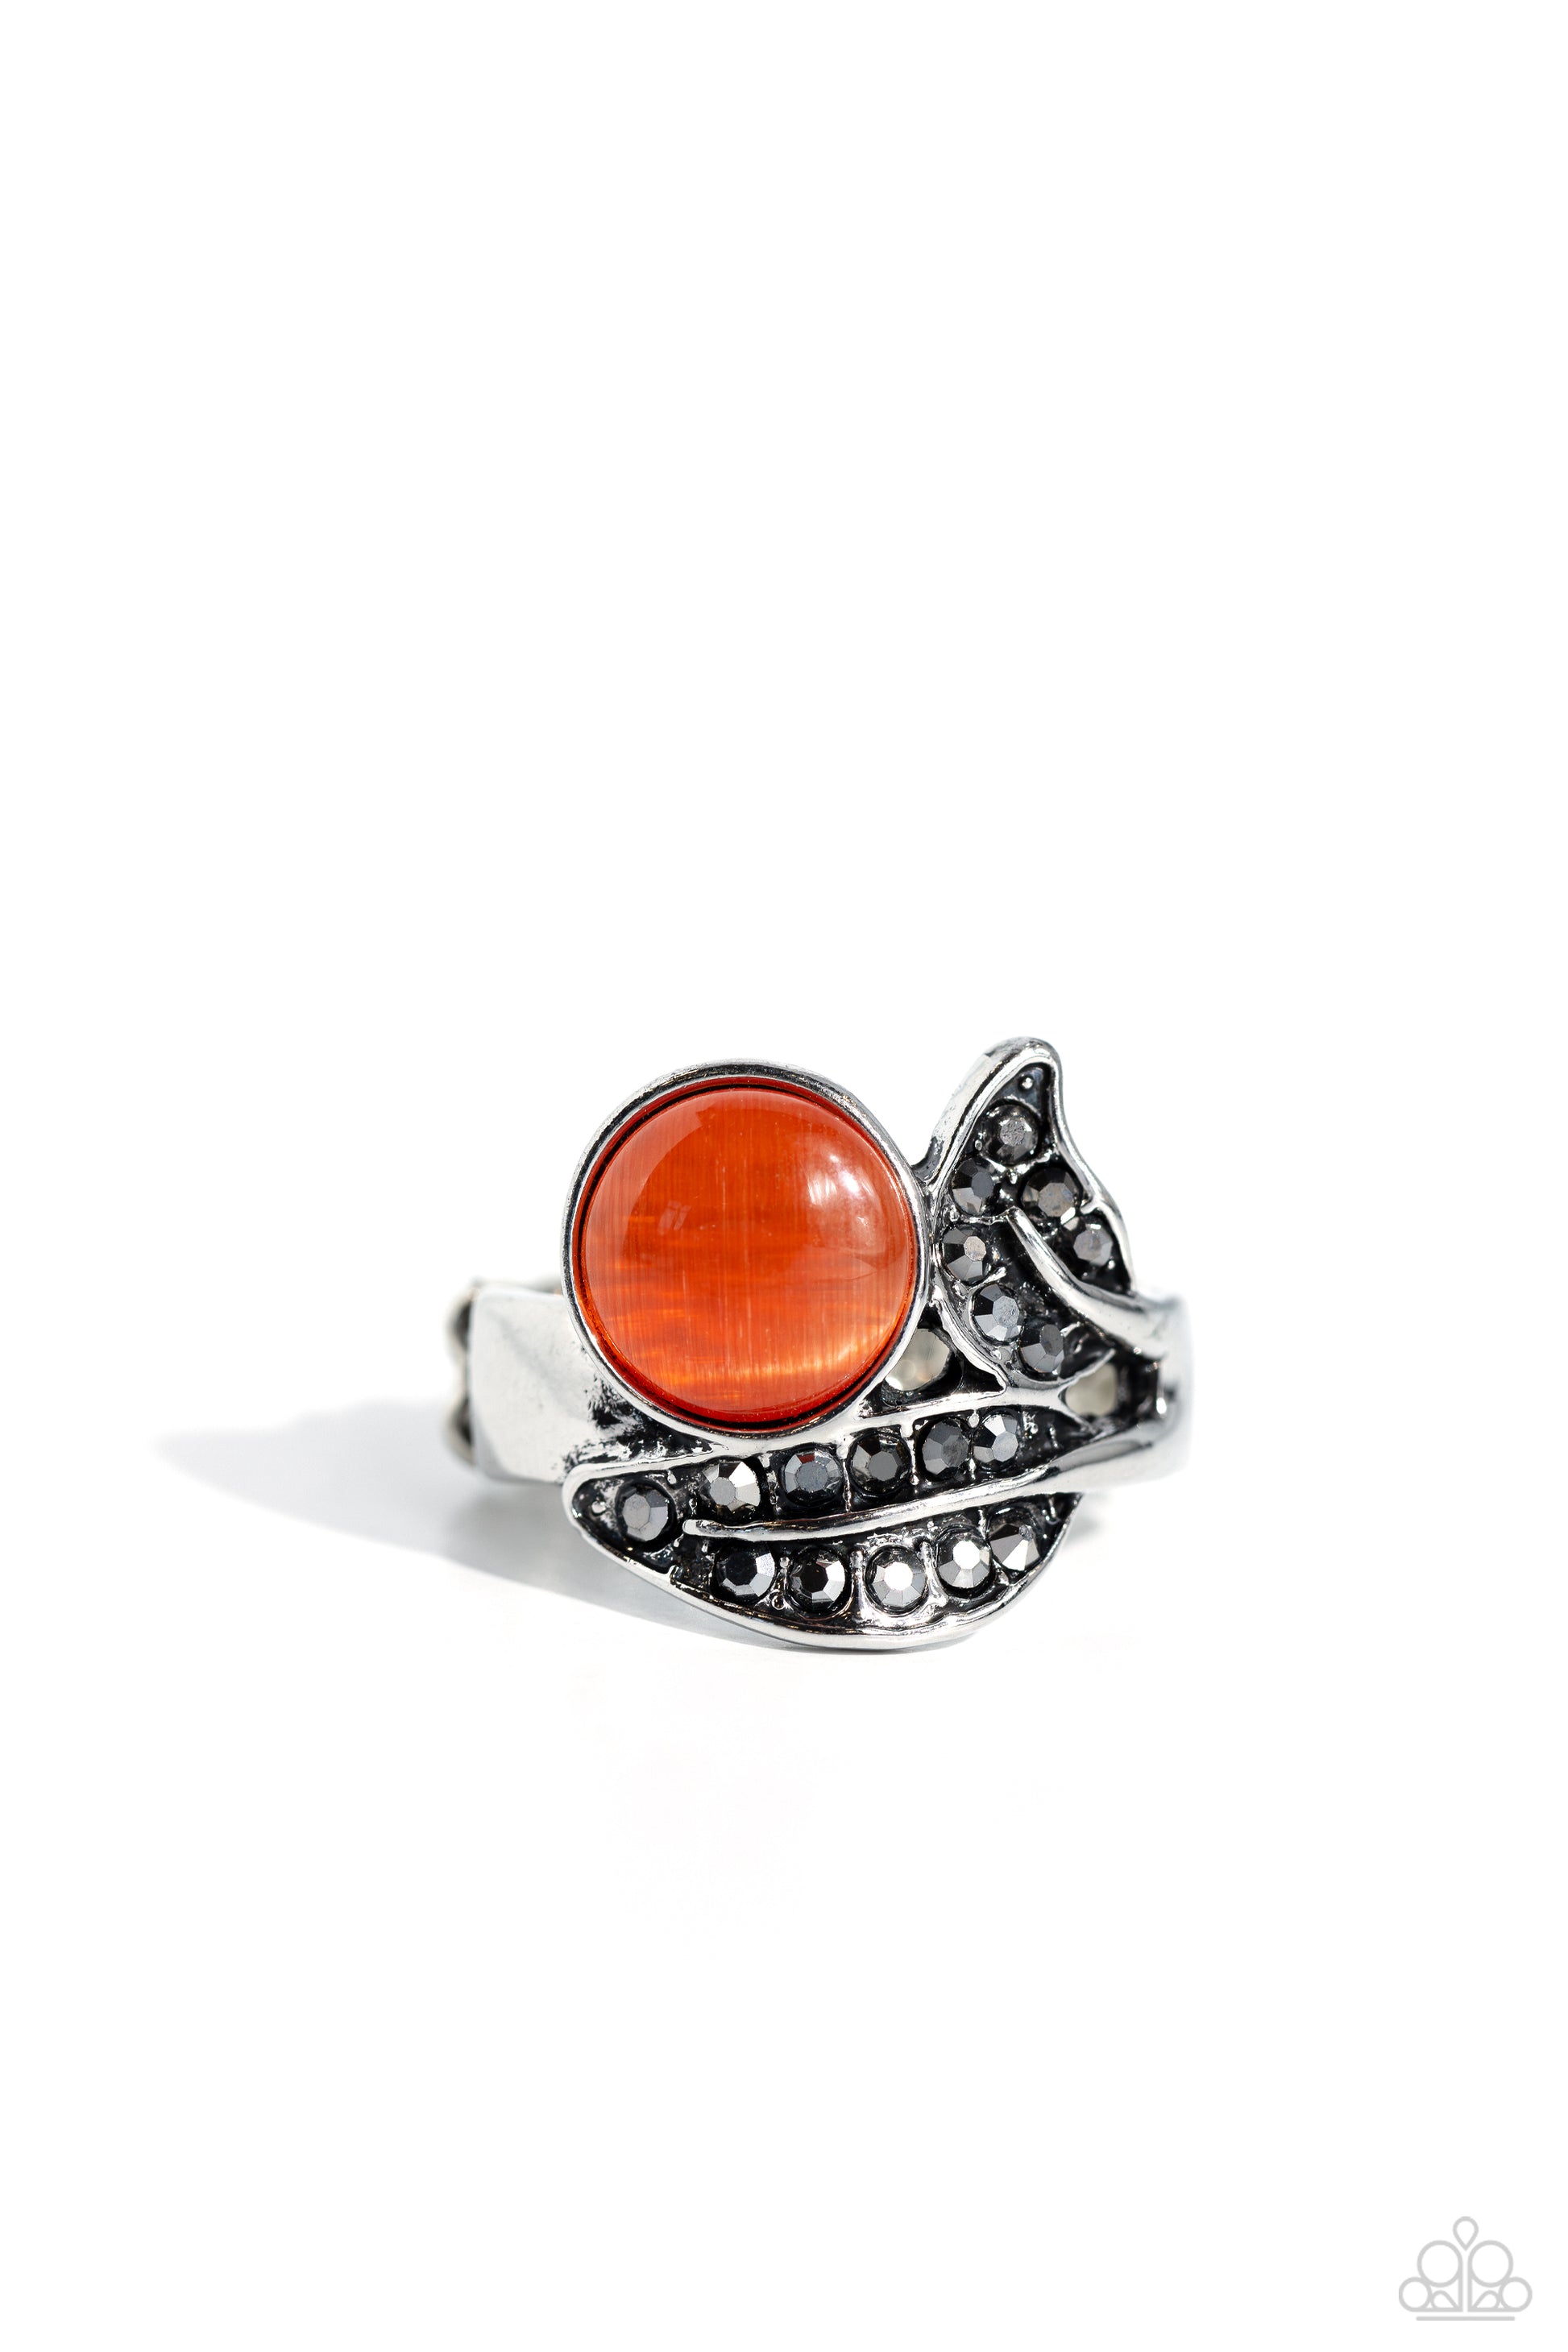 Paparazzi Accessories - Cats Eye Candy - Orange Rings hematite rhinestone encrusted silver leaf frames delicately gather around a dreamy orange cat's eye stone, resulting in an ethereal centerpiece atop the finger. Features a dainty stretchy band for a flexible fit.  Featured inside The Preview at Made for More!  Sold as one individual ring.